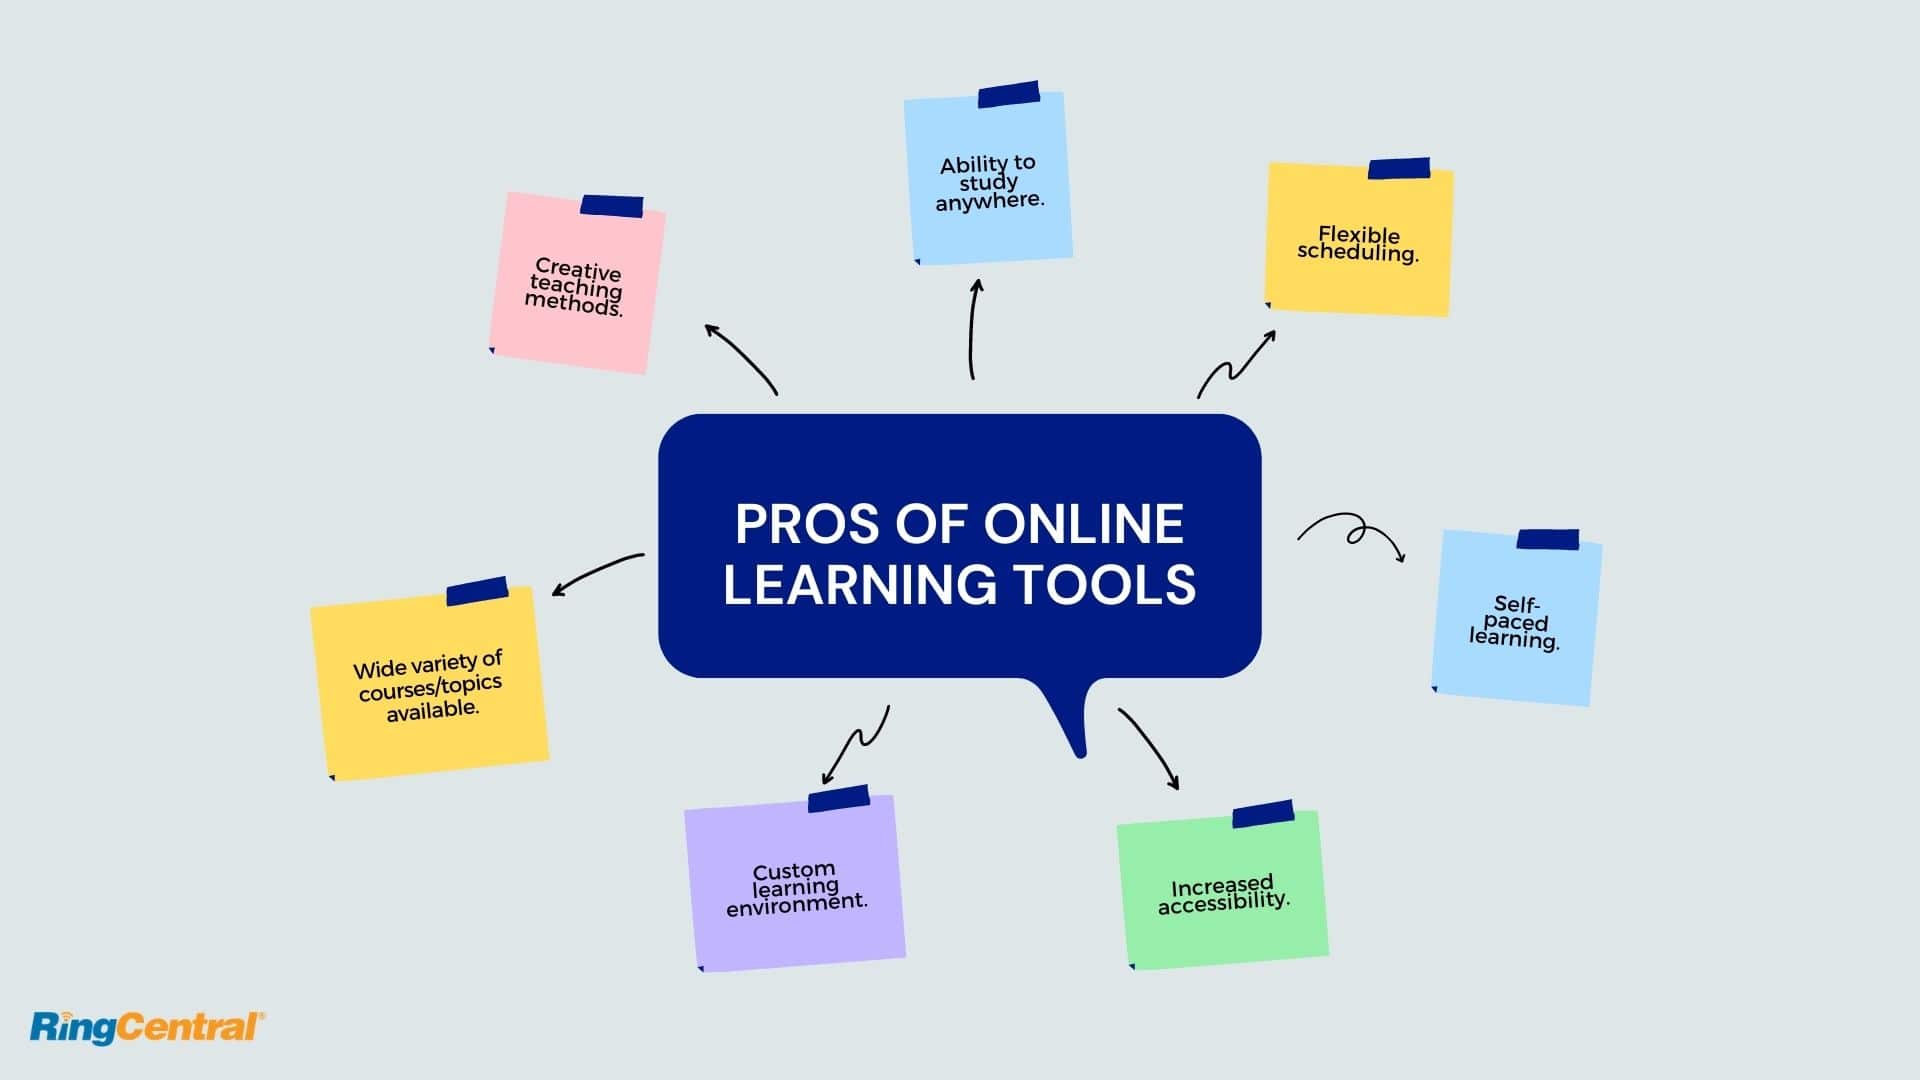 Pros of online learning tools